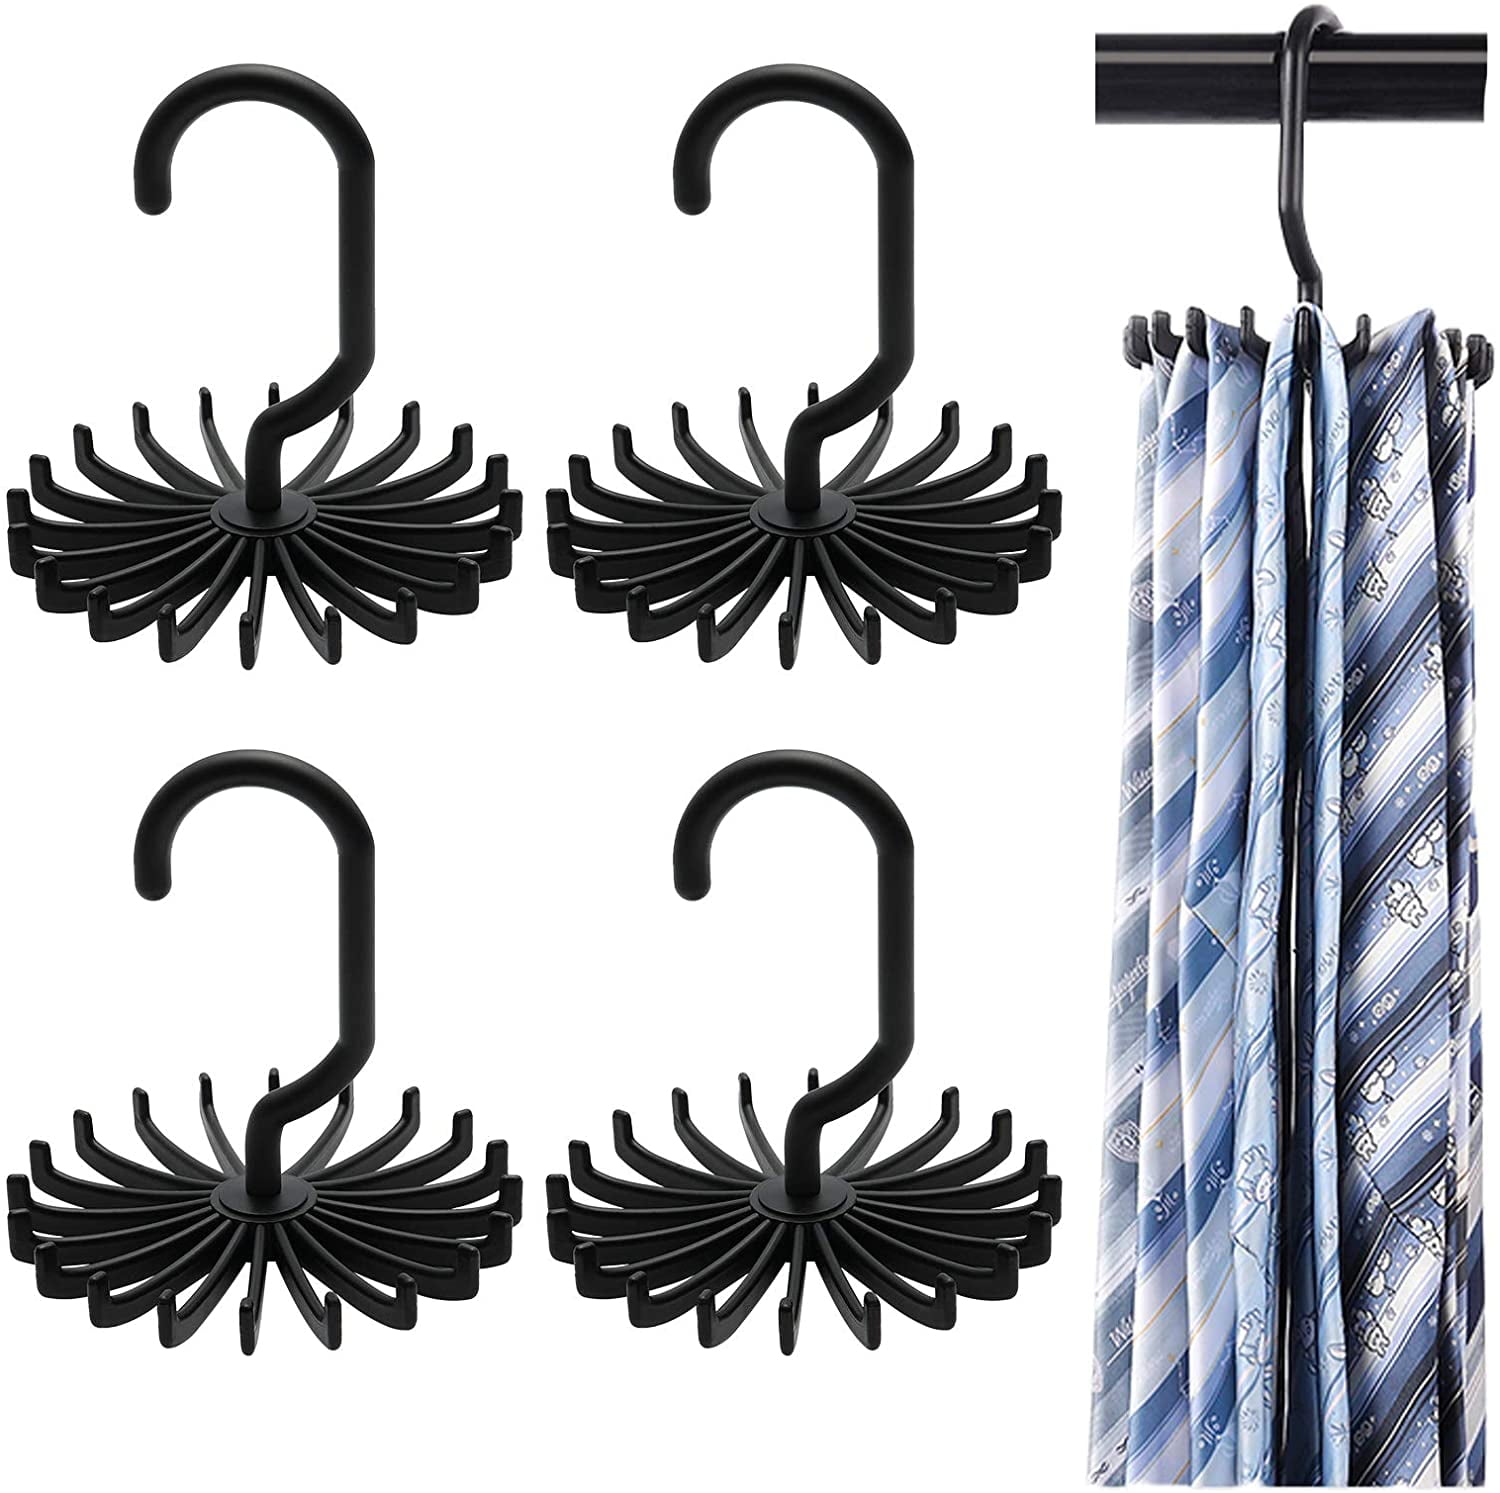 Scarf Hanger 5 Round-Loops Holder Ties Belts Organizer Home Tools Hot 1pcs 